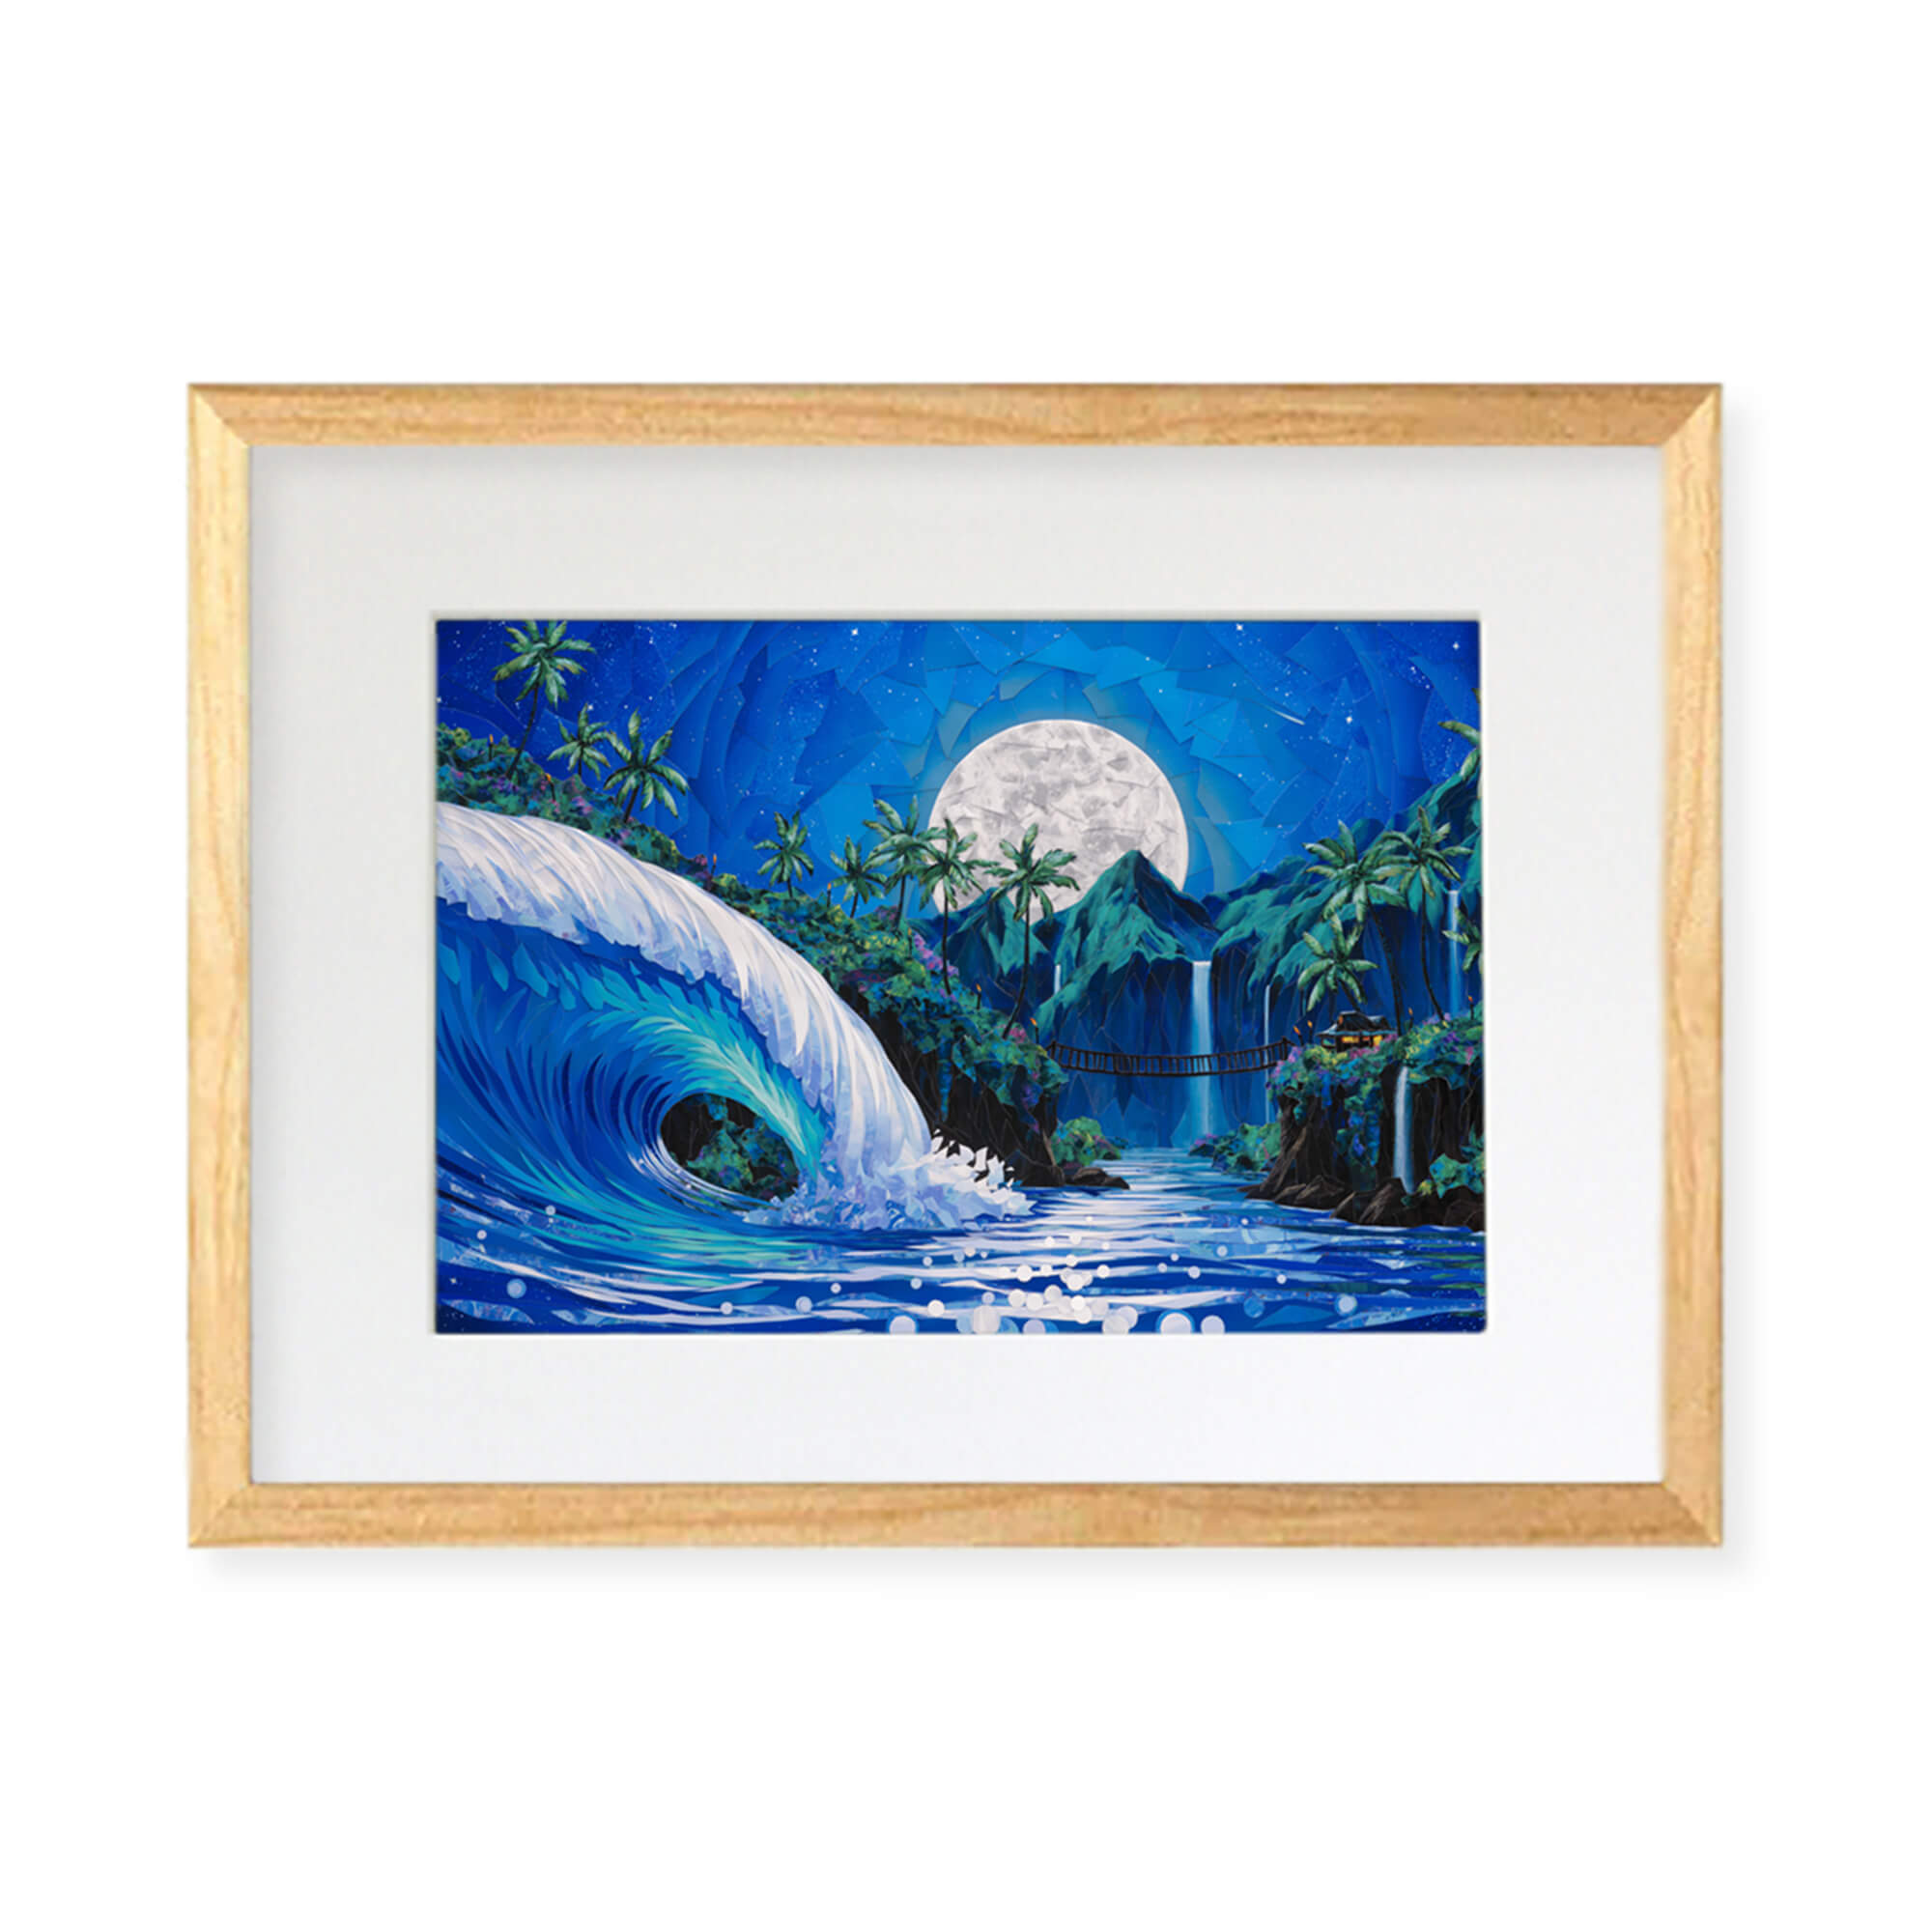 A framed matted art print featuring a collage of an evening view of a tropical landscape with a huge rolling wave, several waterfalls, and a full moon background by Hawaii artist Patrick Parker